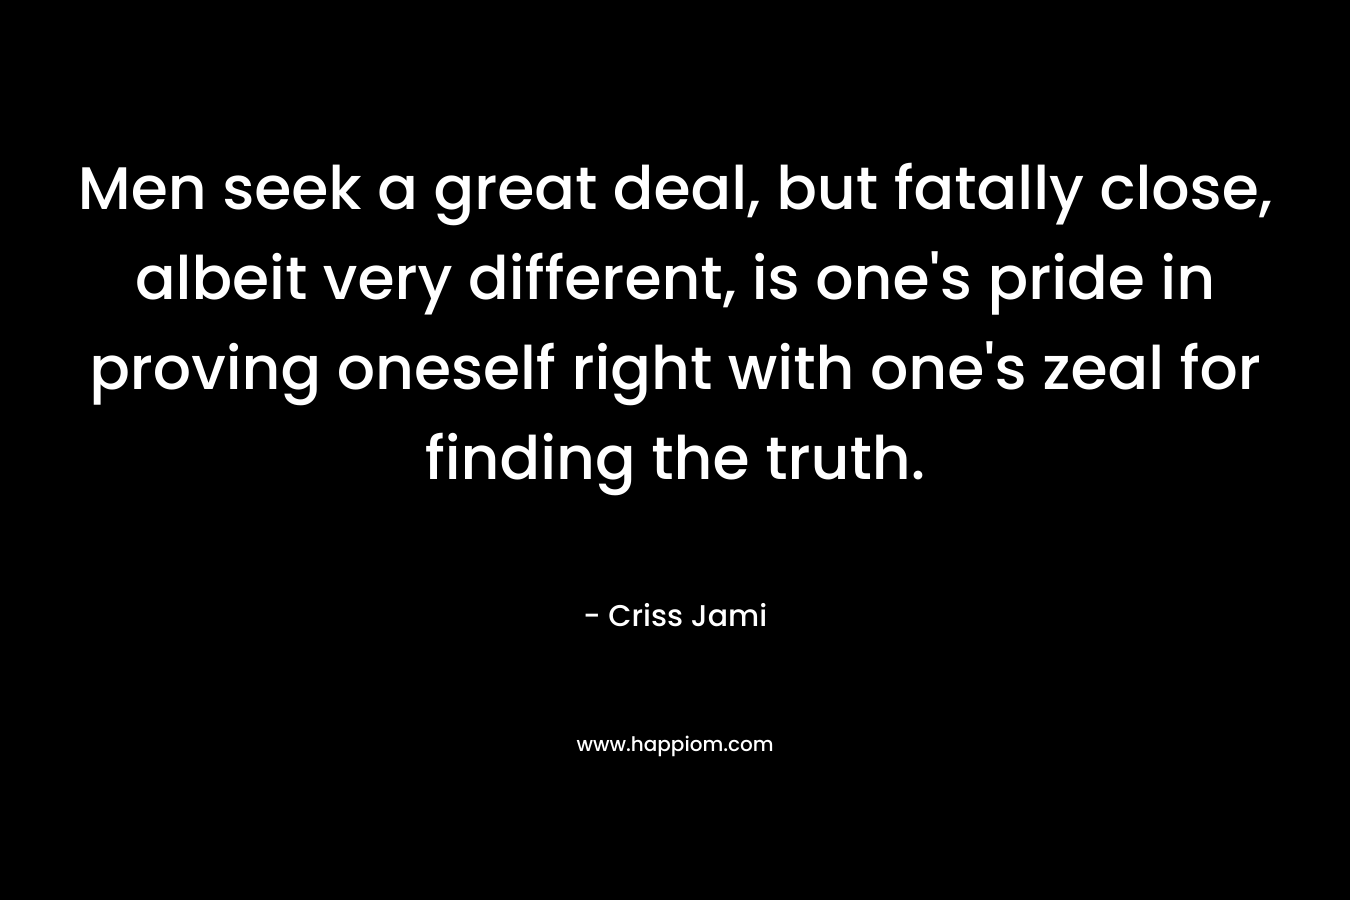 Men seek a great deal, but fatally close, albeit very different, is one’s pride in proving oneself right with one’s zeal for finding the truth. – Criss Jami